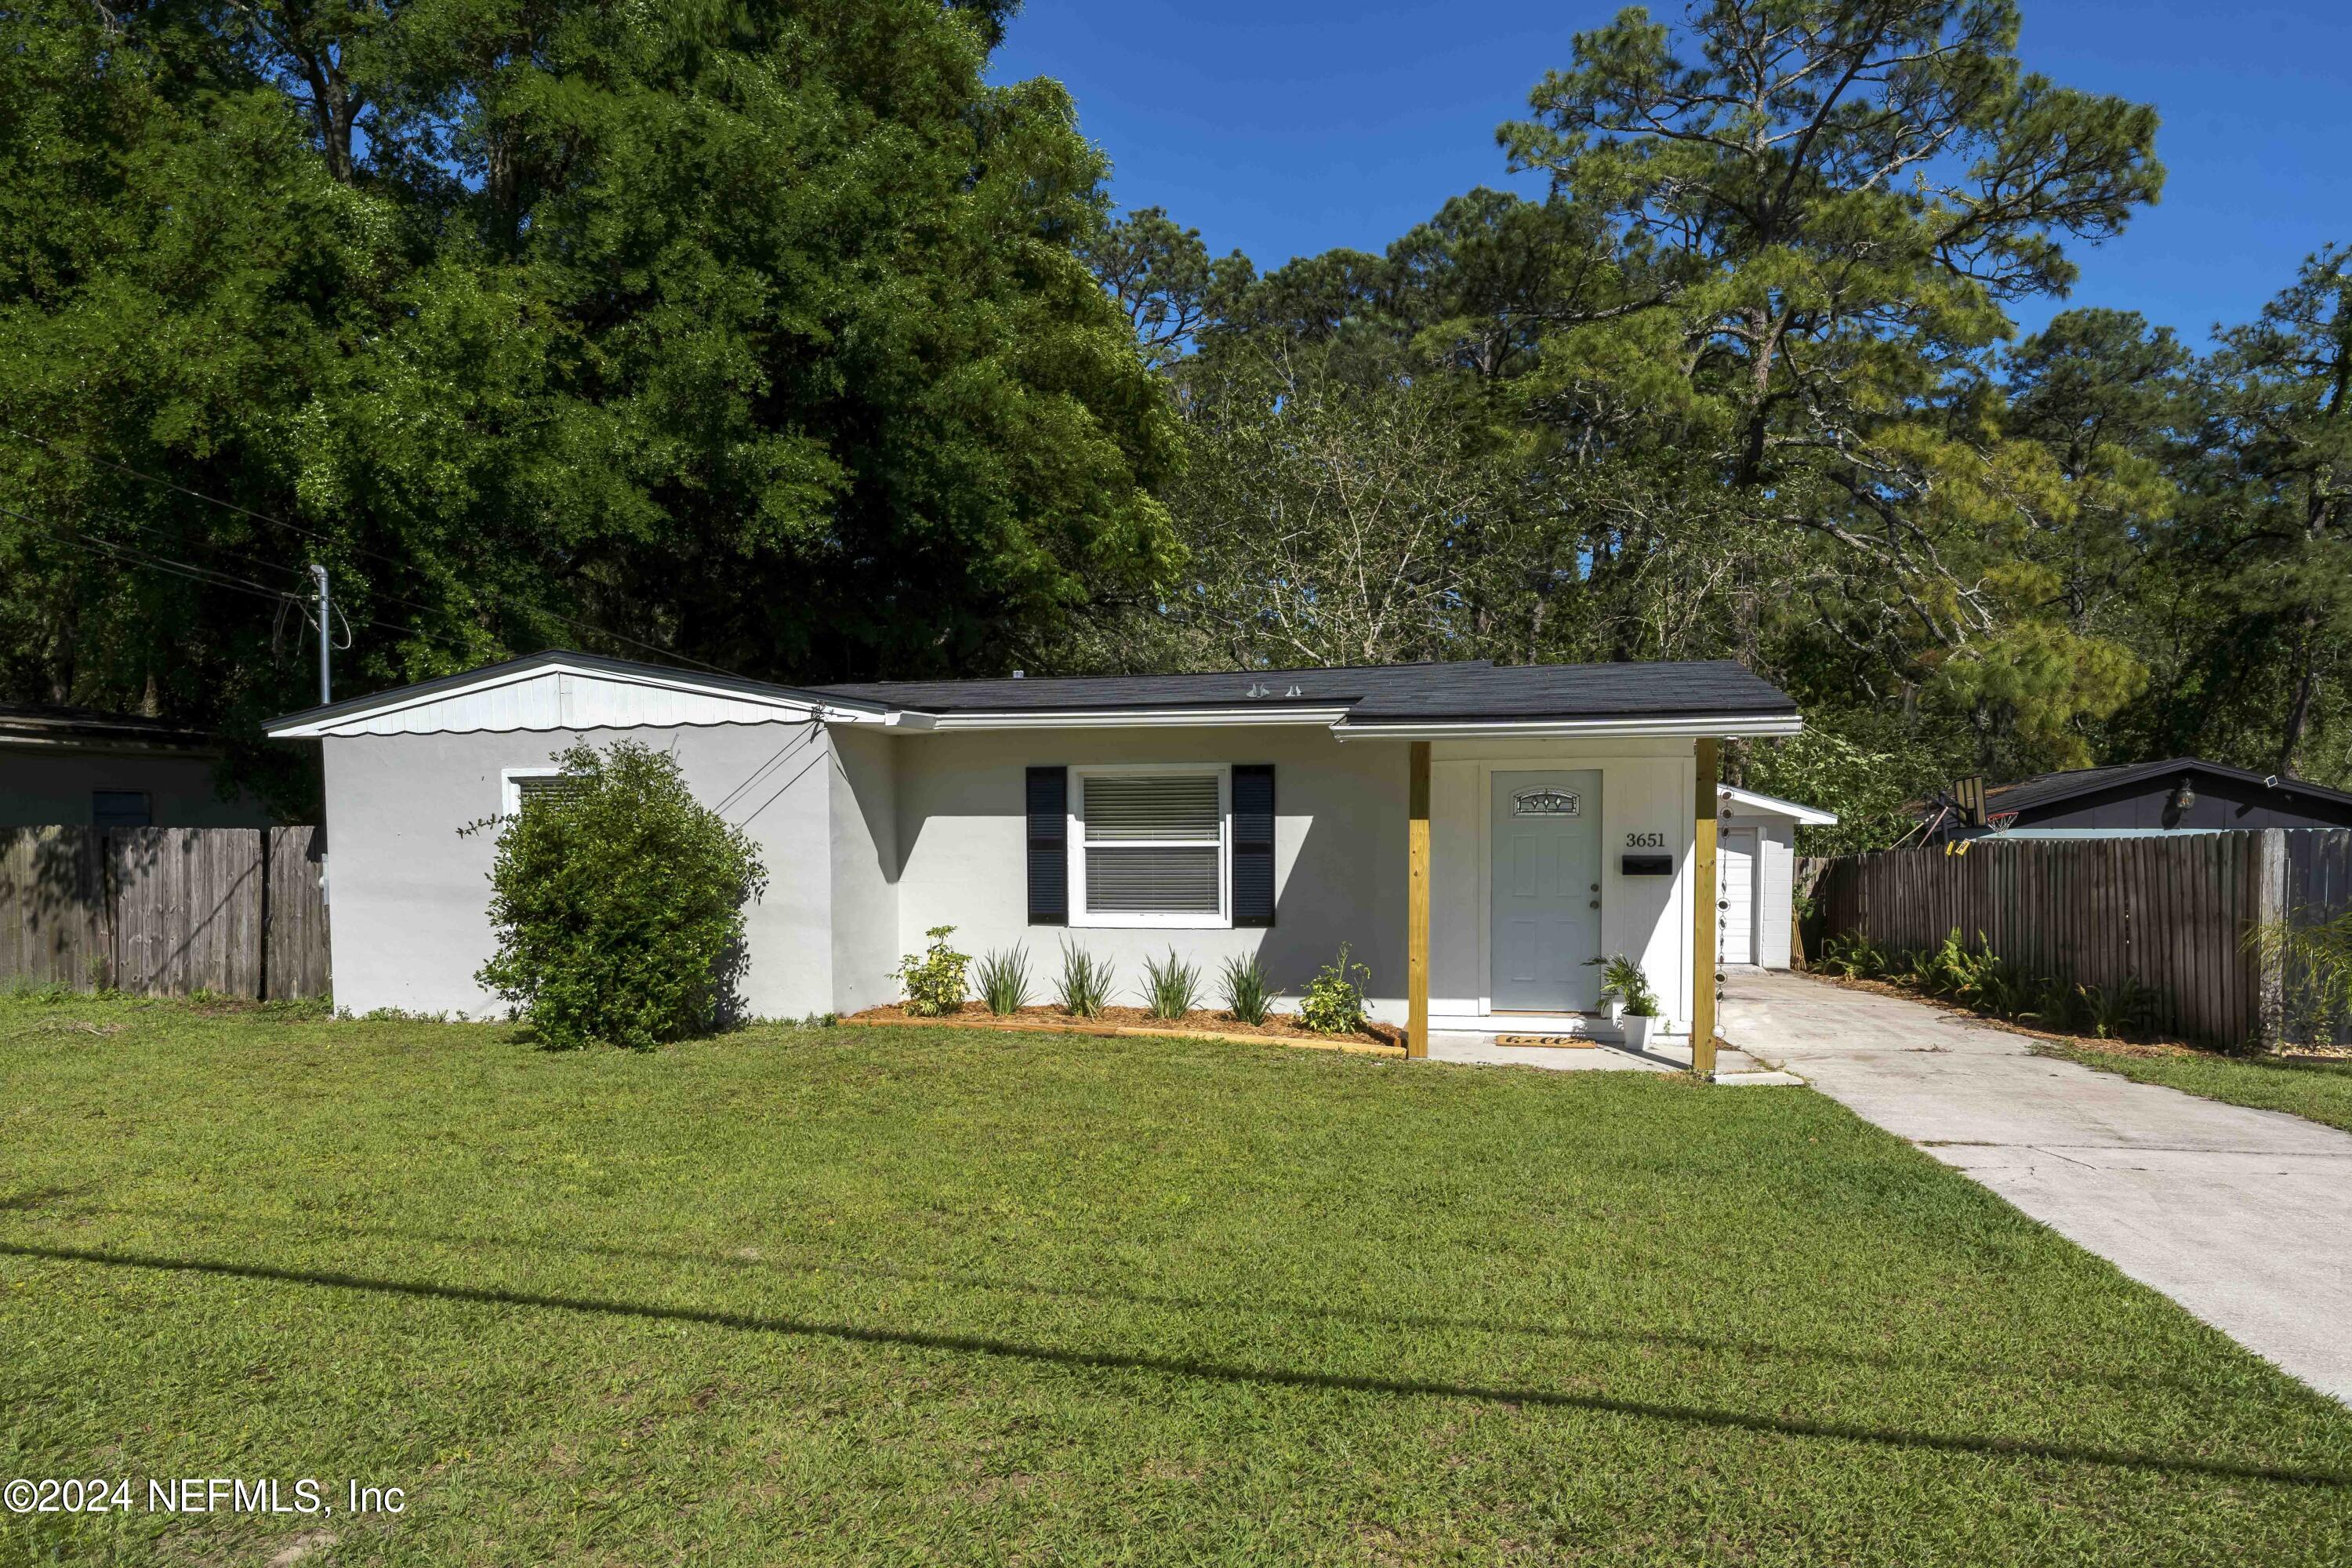 Jacksonville, FL home for sale located at 3651 Peach Drive, Jacksonville, FL 32246